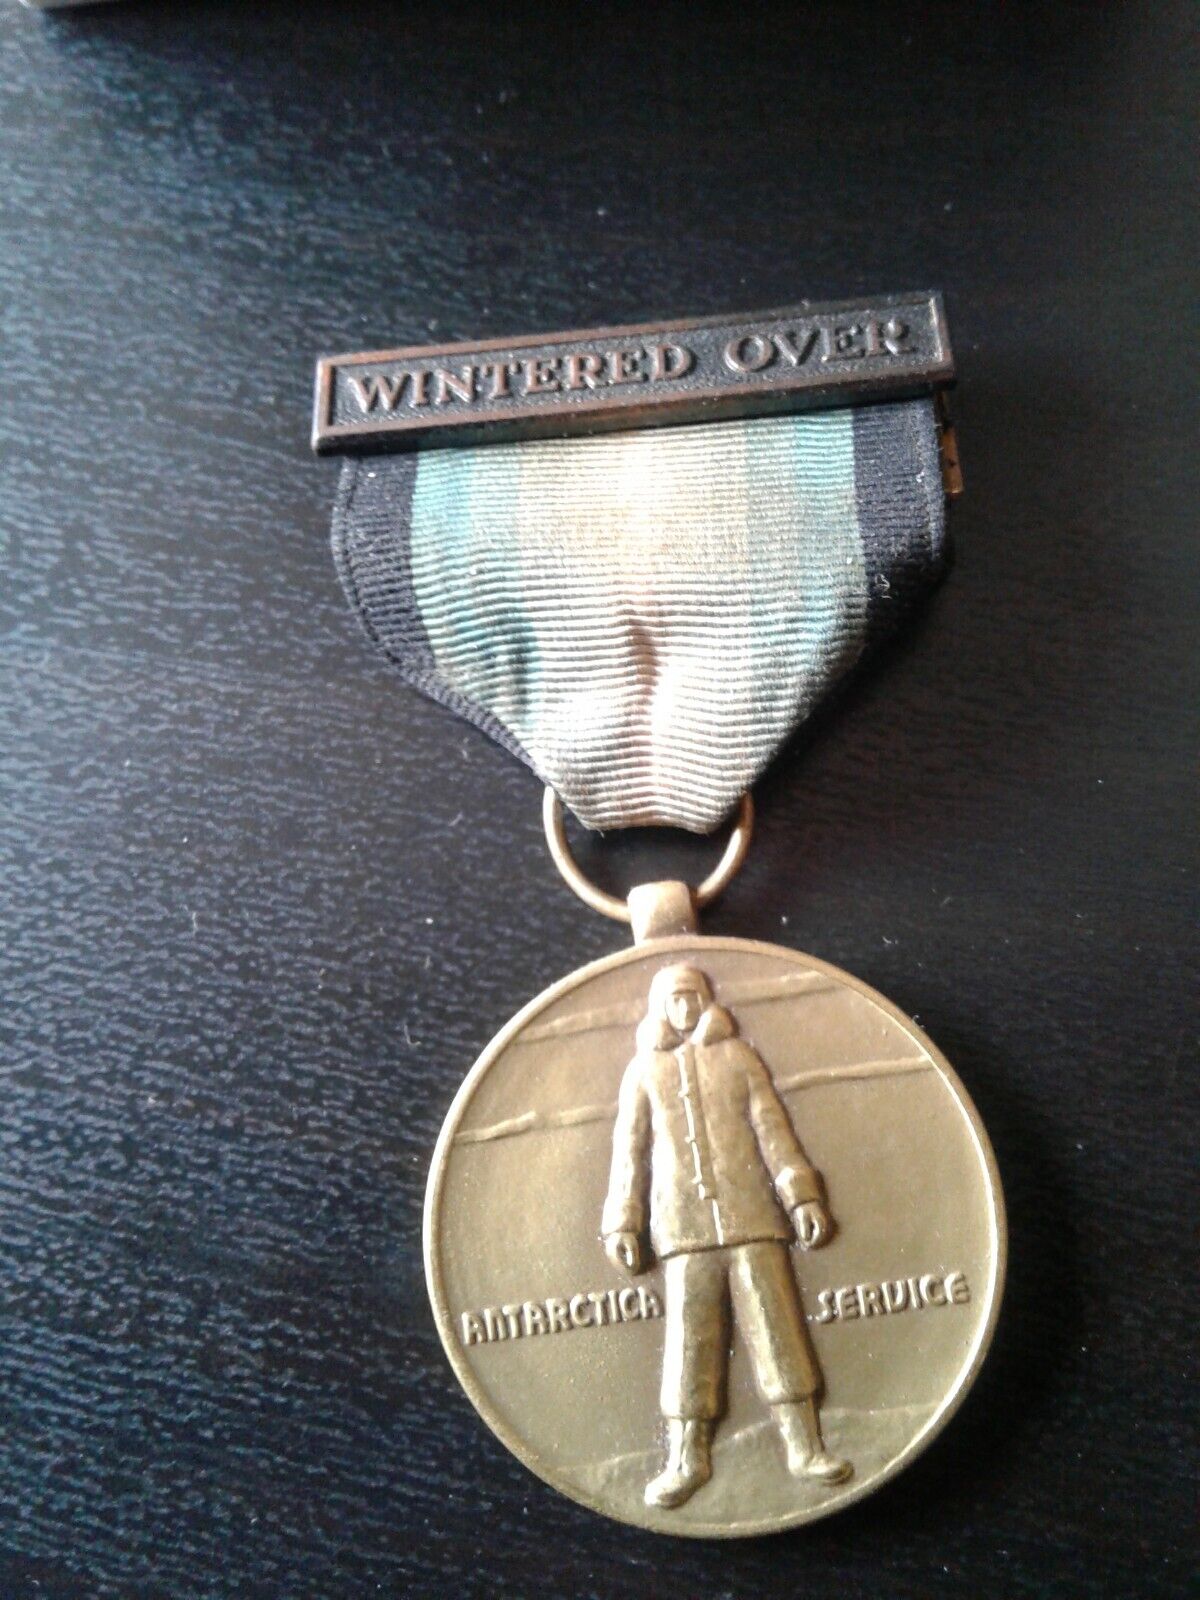 Antarctica Service Medal With Wintered Over Bar